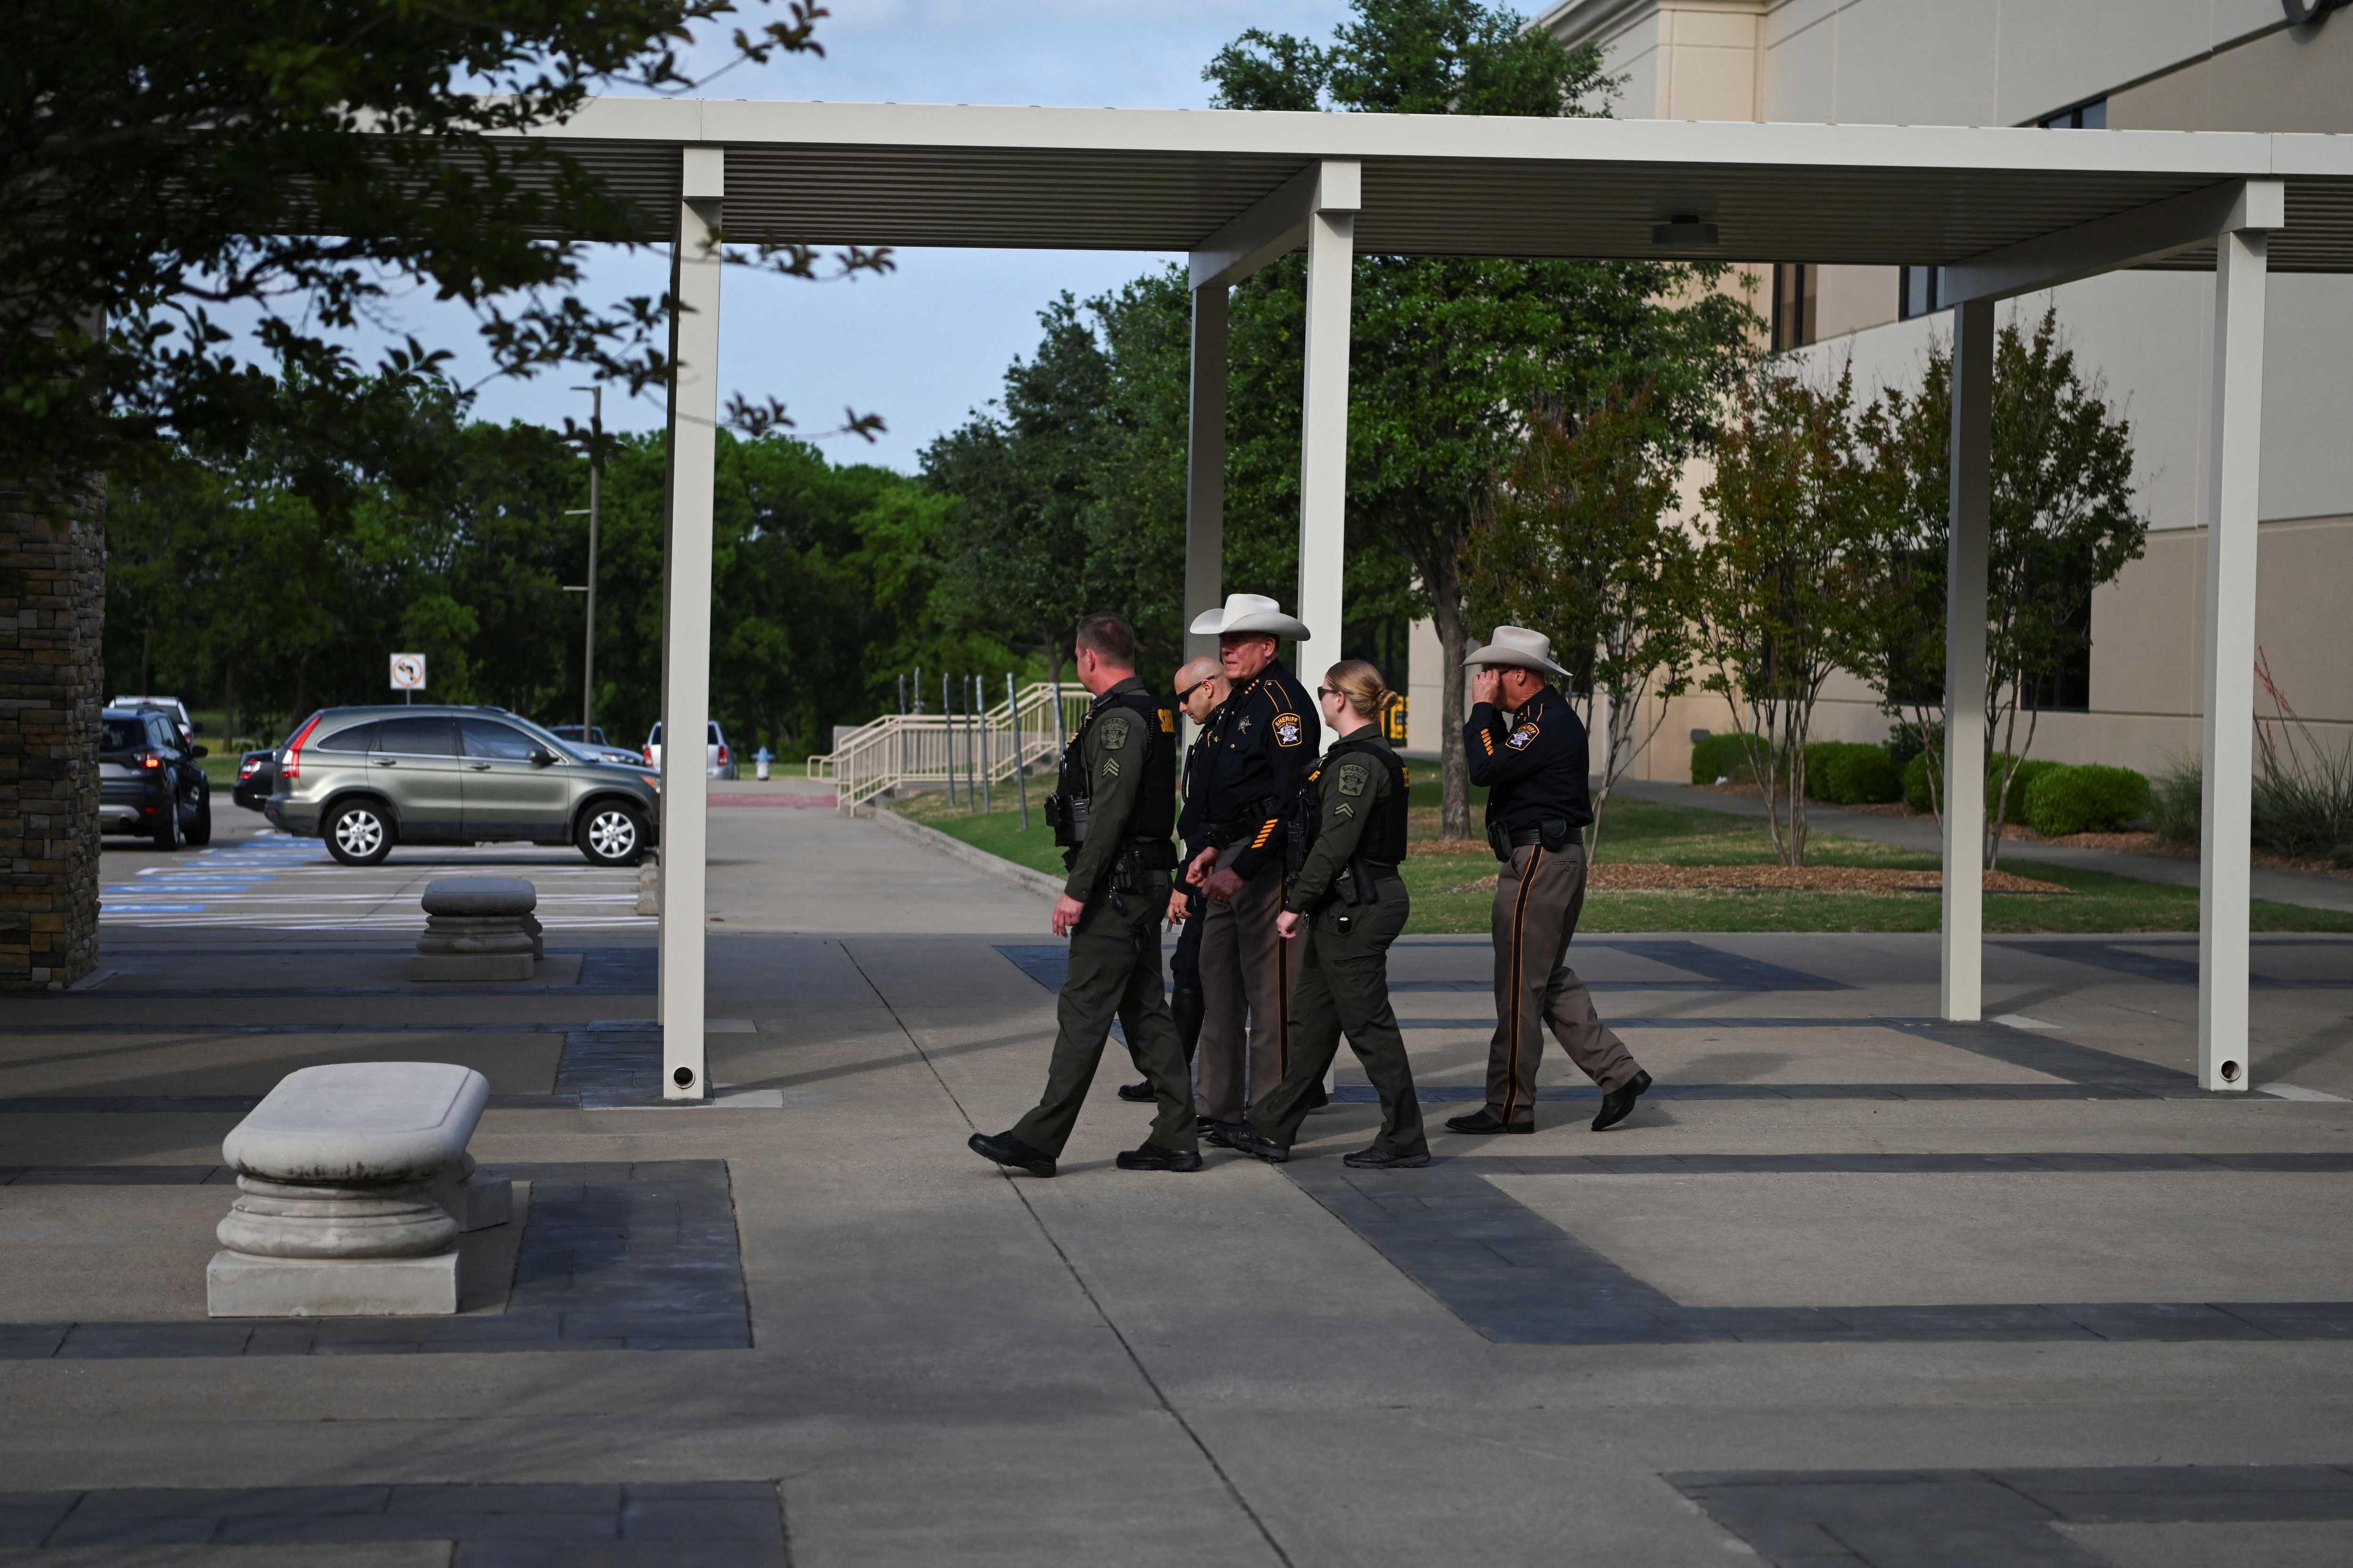 Police leave after attending a vigil held at a church for the Allen Premium Outlets Mall shooting victims, the day after a gunman shot multiple people at the Dallas-area Allen Premium Outlets mall in Allen, Texas, US May 7. Photo: Reuters